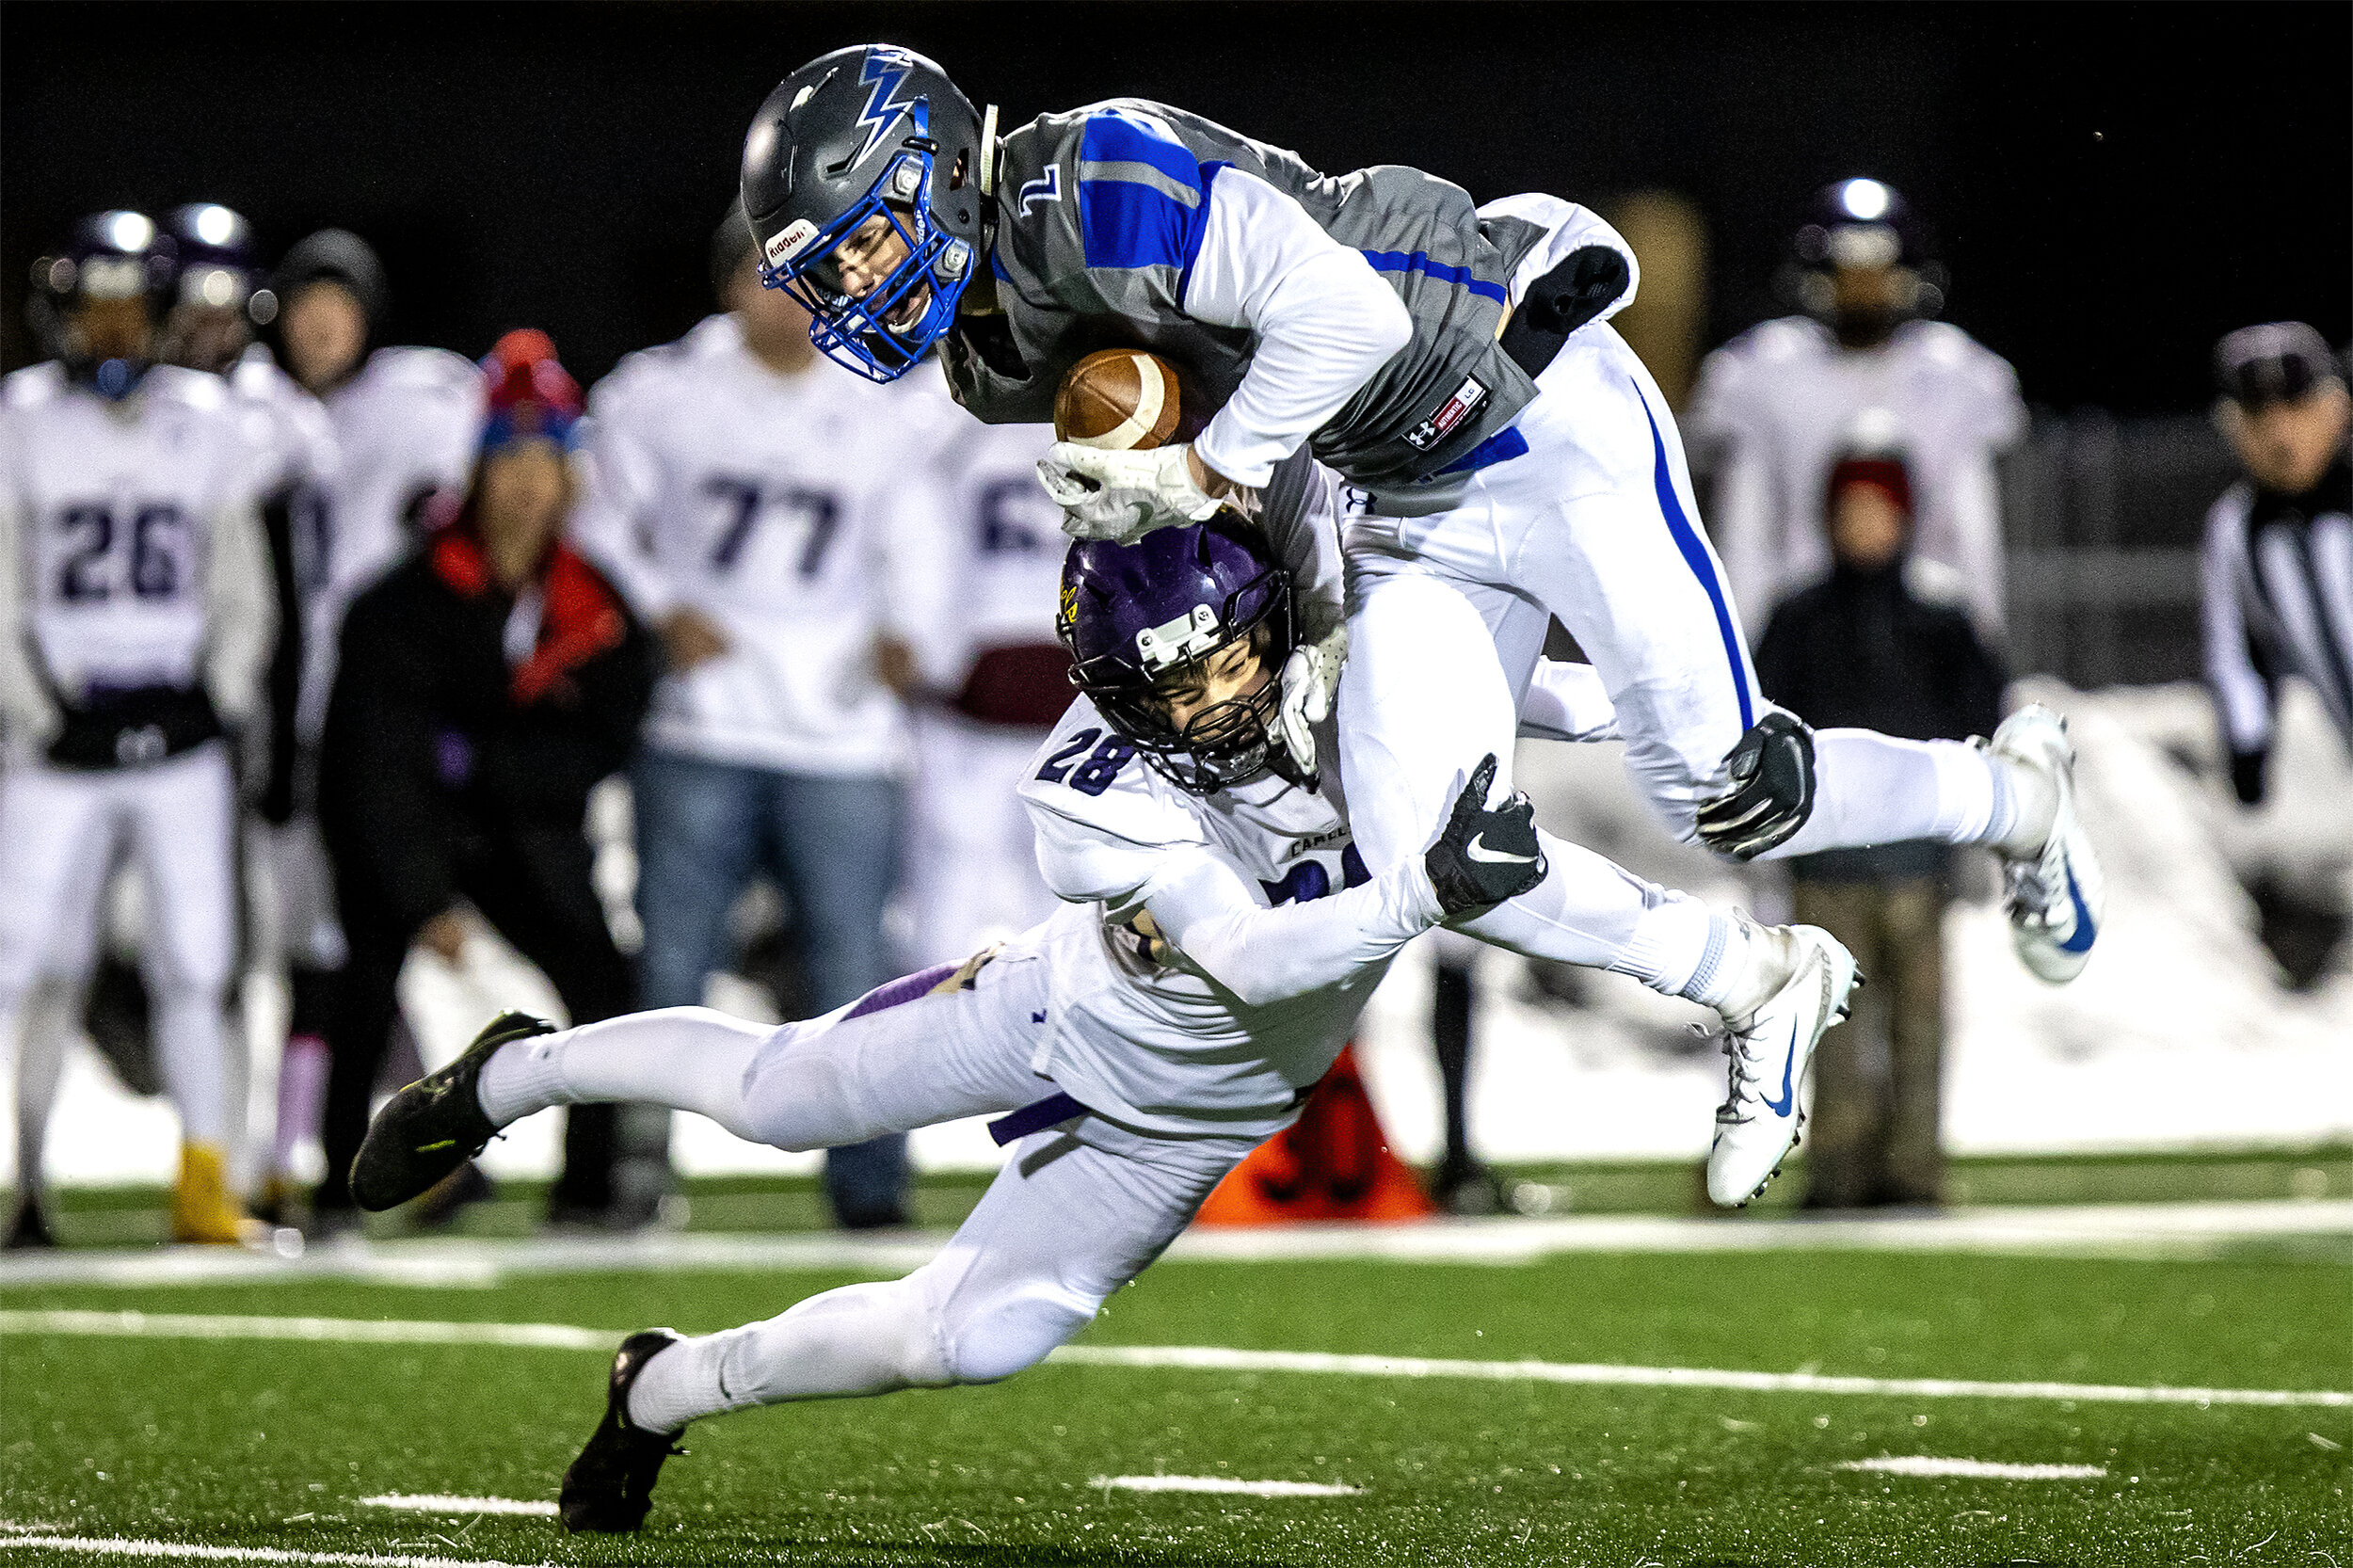  The Bolts' Blaine Allen is lifted into the air by the Camels' Mason Dykes after catching a pass in Friday's playoff game. The Bolts defeated the Camels 24-20. The Bolts,  ranked at number one with an undefeated season, received an unexpected challen